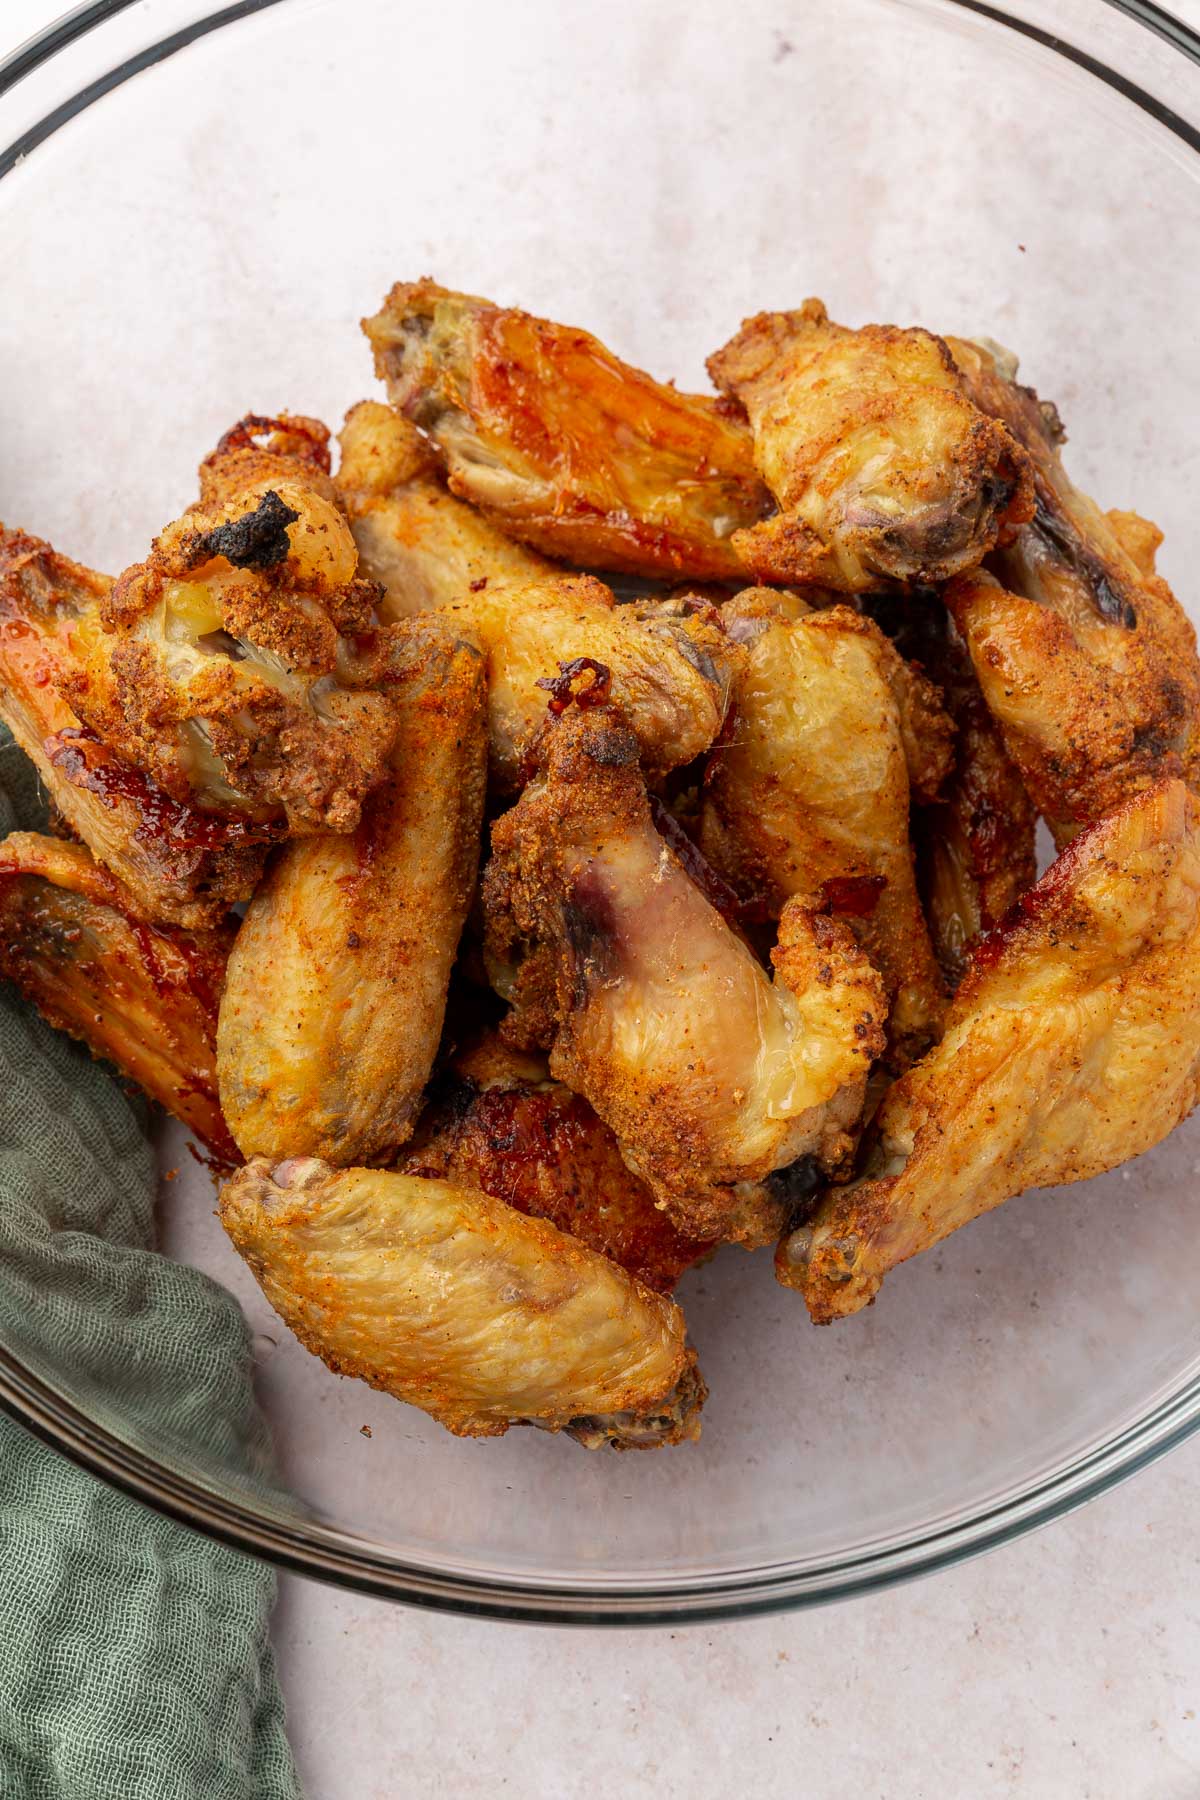 A glass mixing bowl with a pile of gluten-free chicken wings in it after baking in the oven.